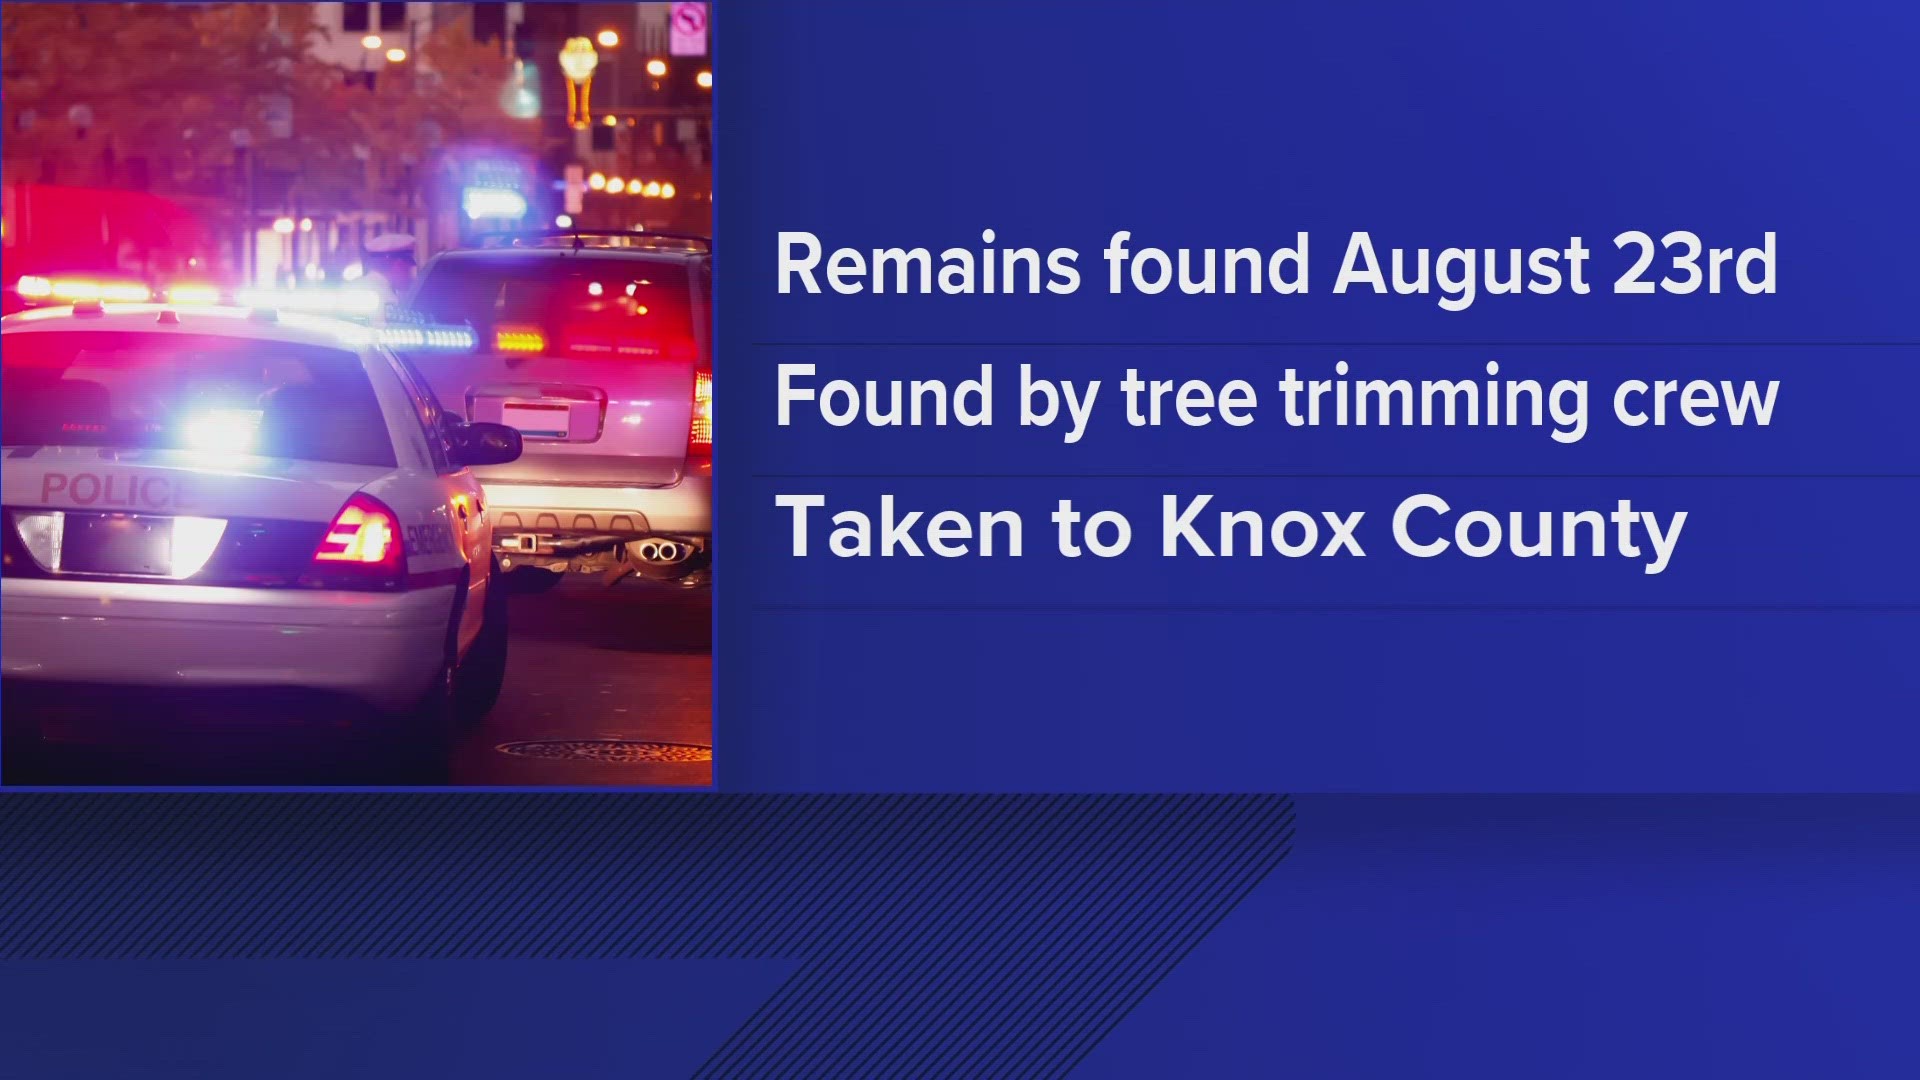 The Sevier County Sheriff's Office said they were called to Grassy Branch Rd. the evening of Aug. 23 after crews said they found skeletal remains.